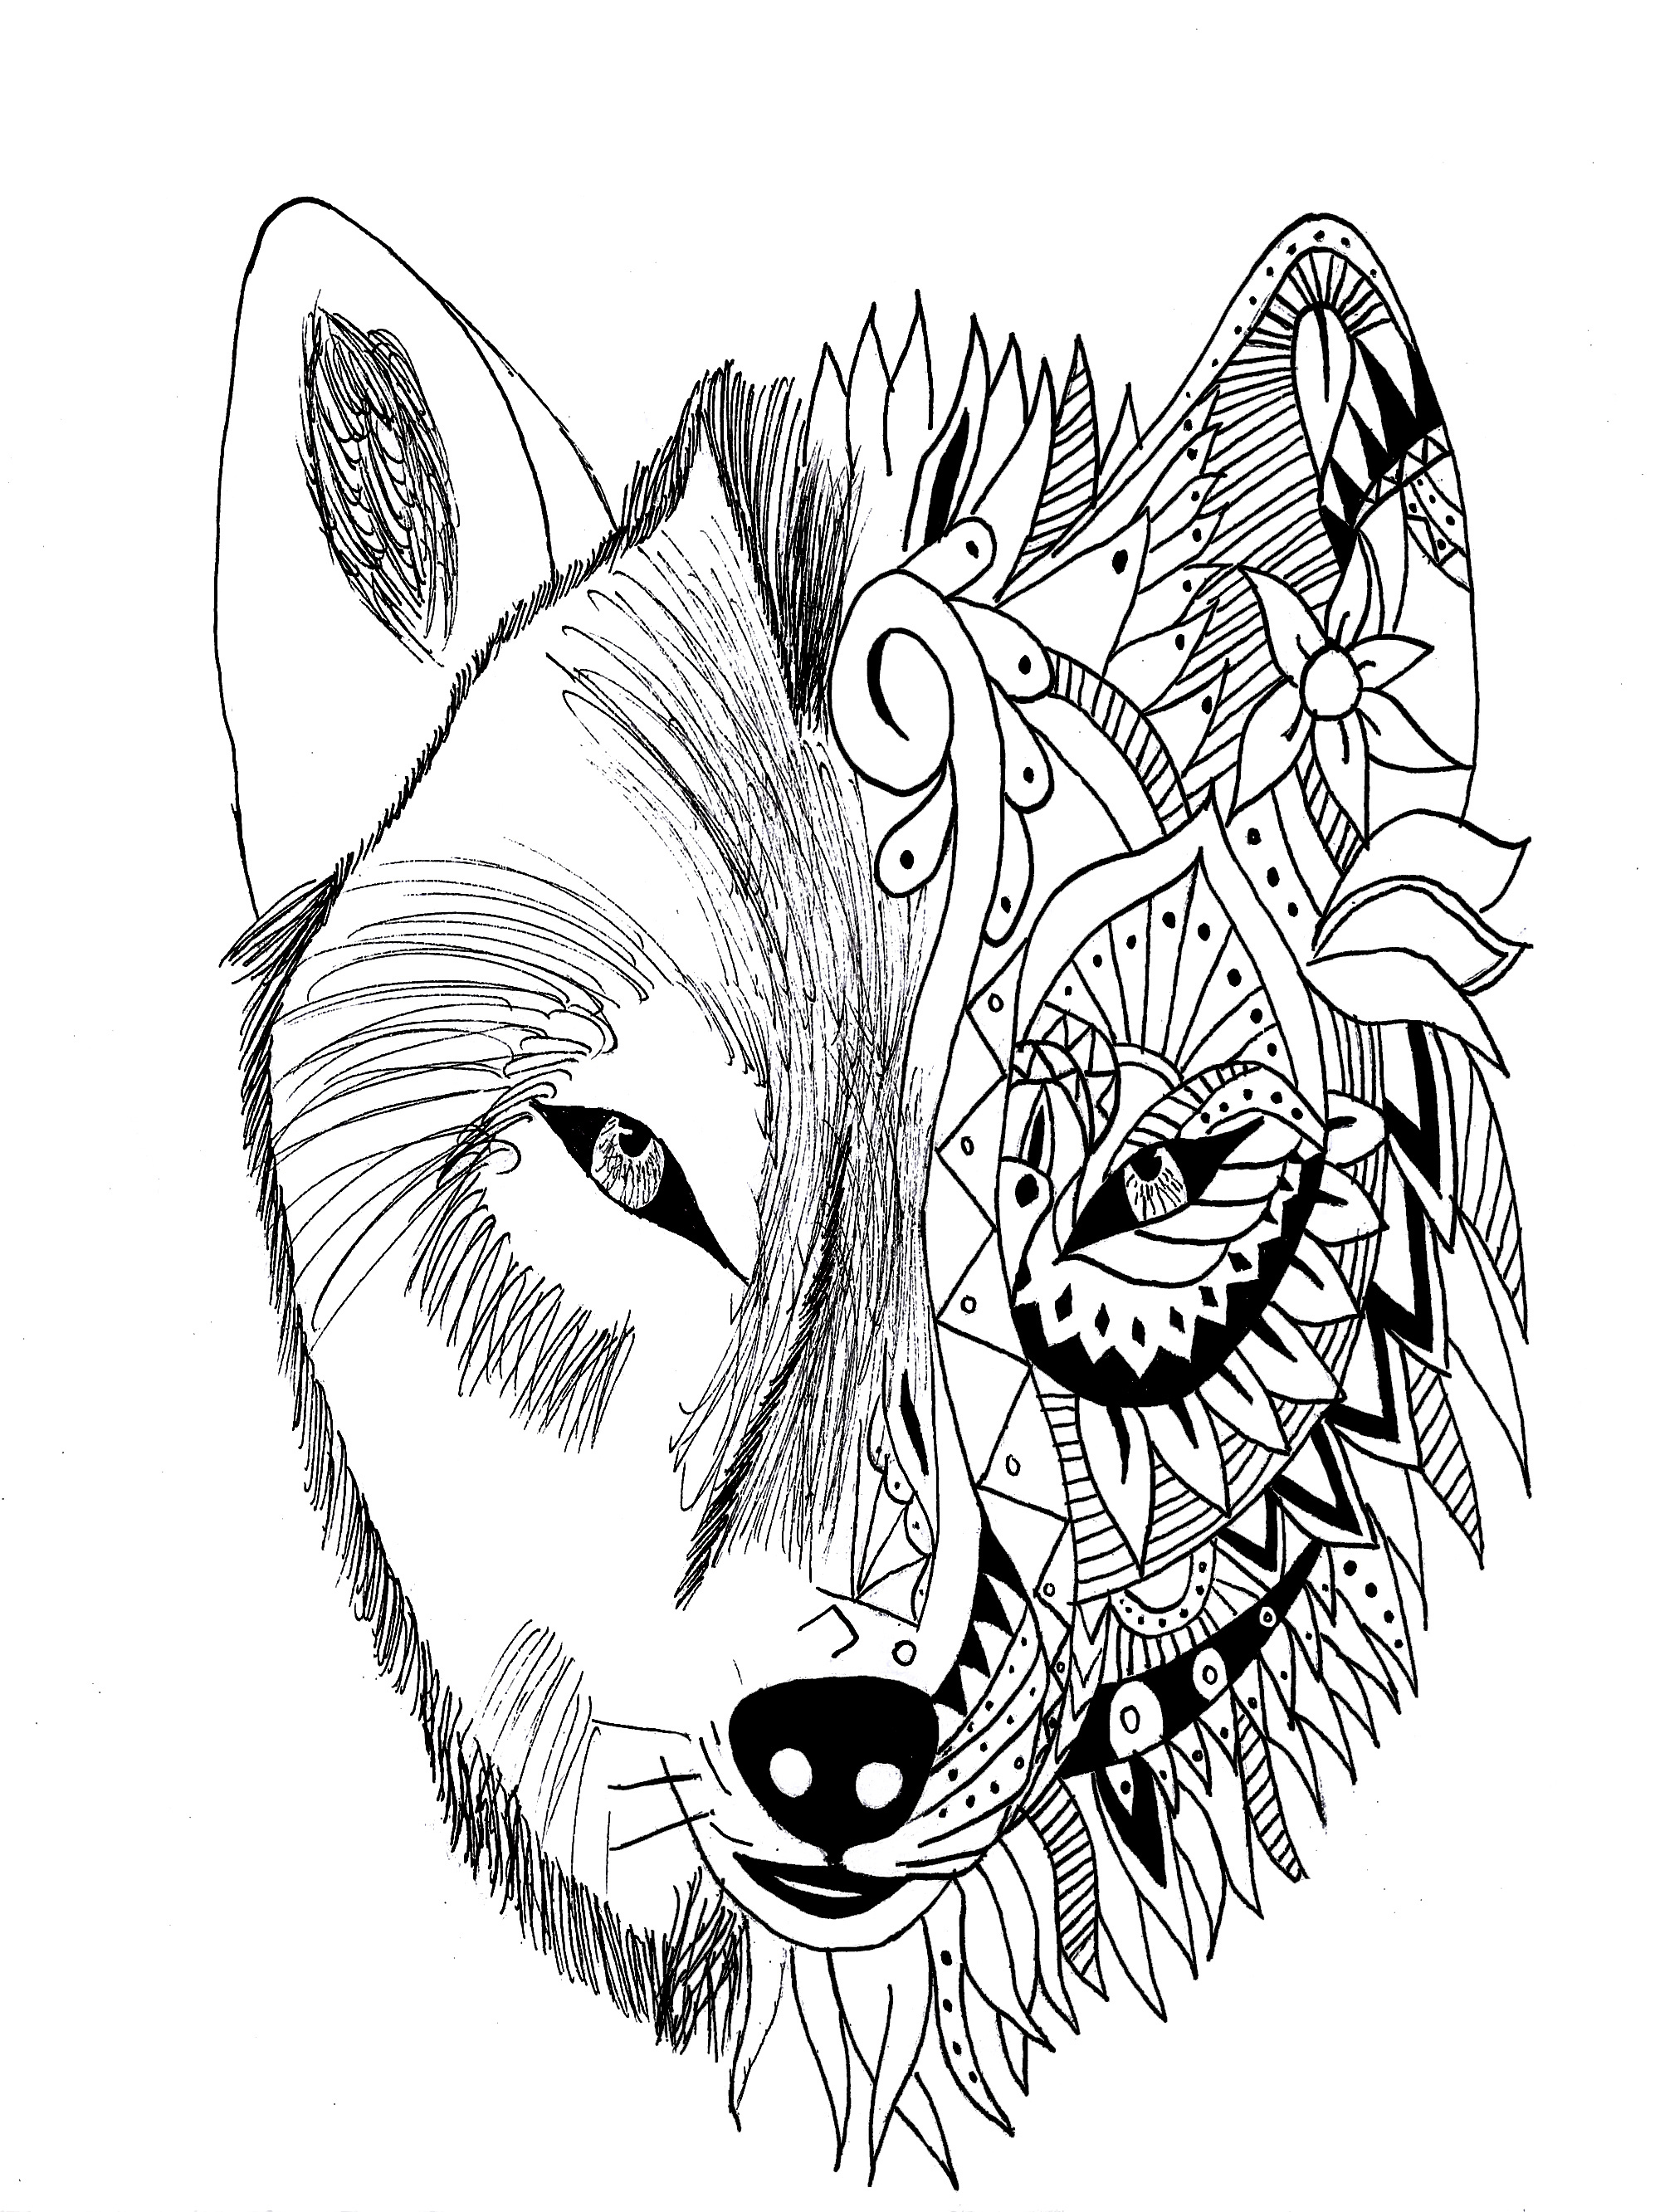 Tattoo wolf krissy - Tattoos Adult Coloring Pages